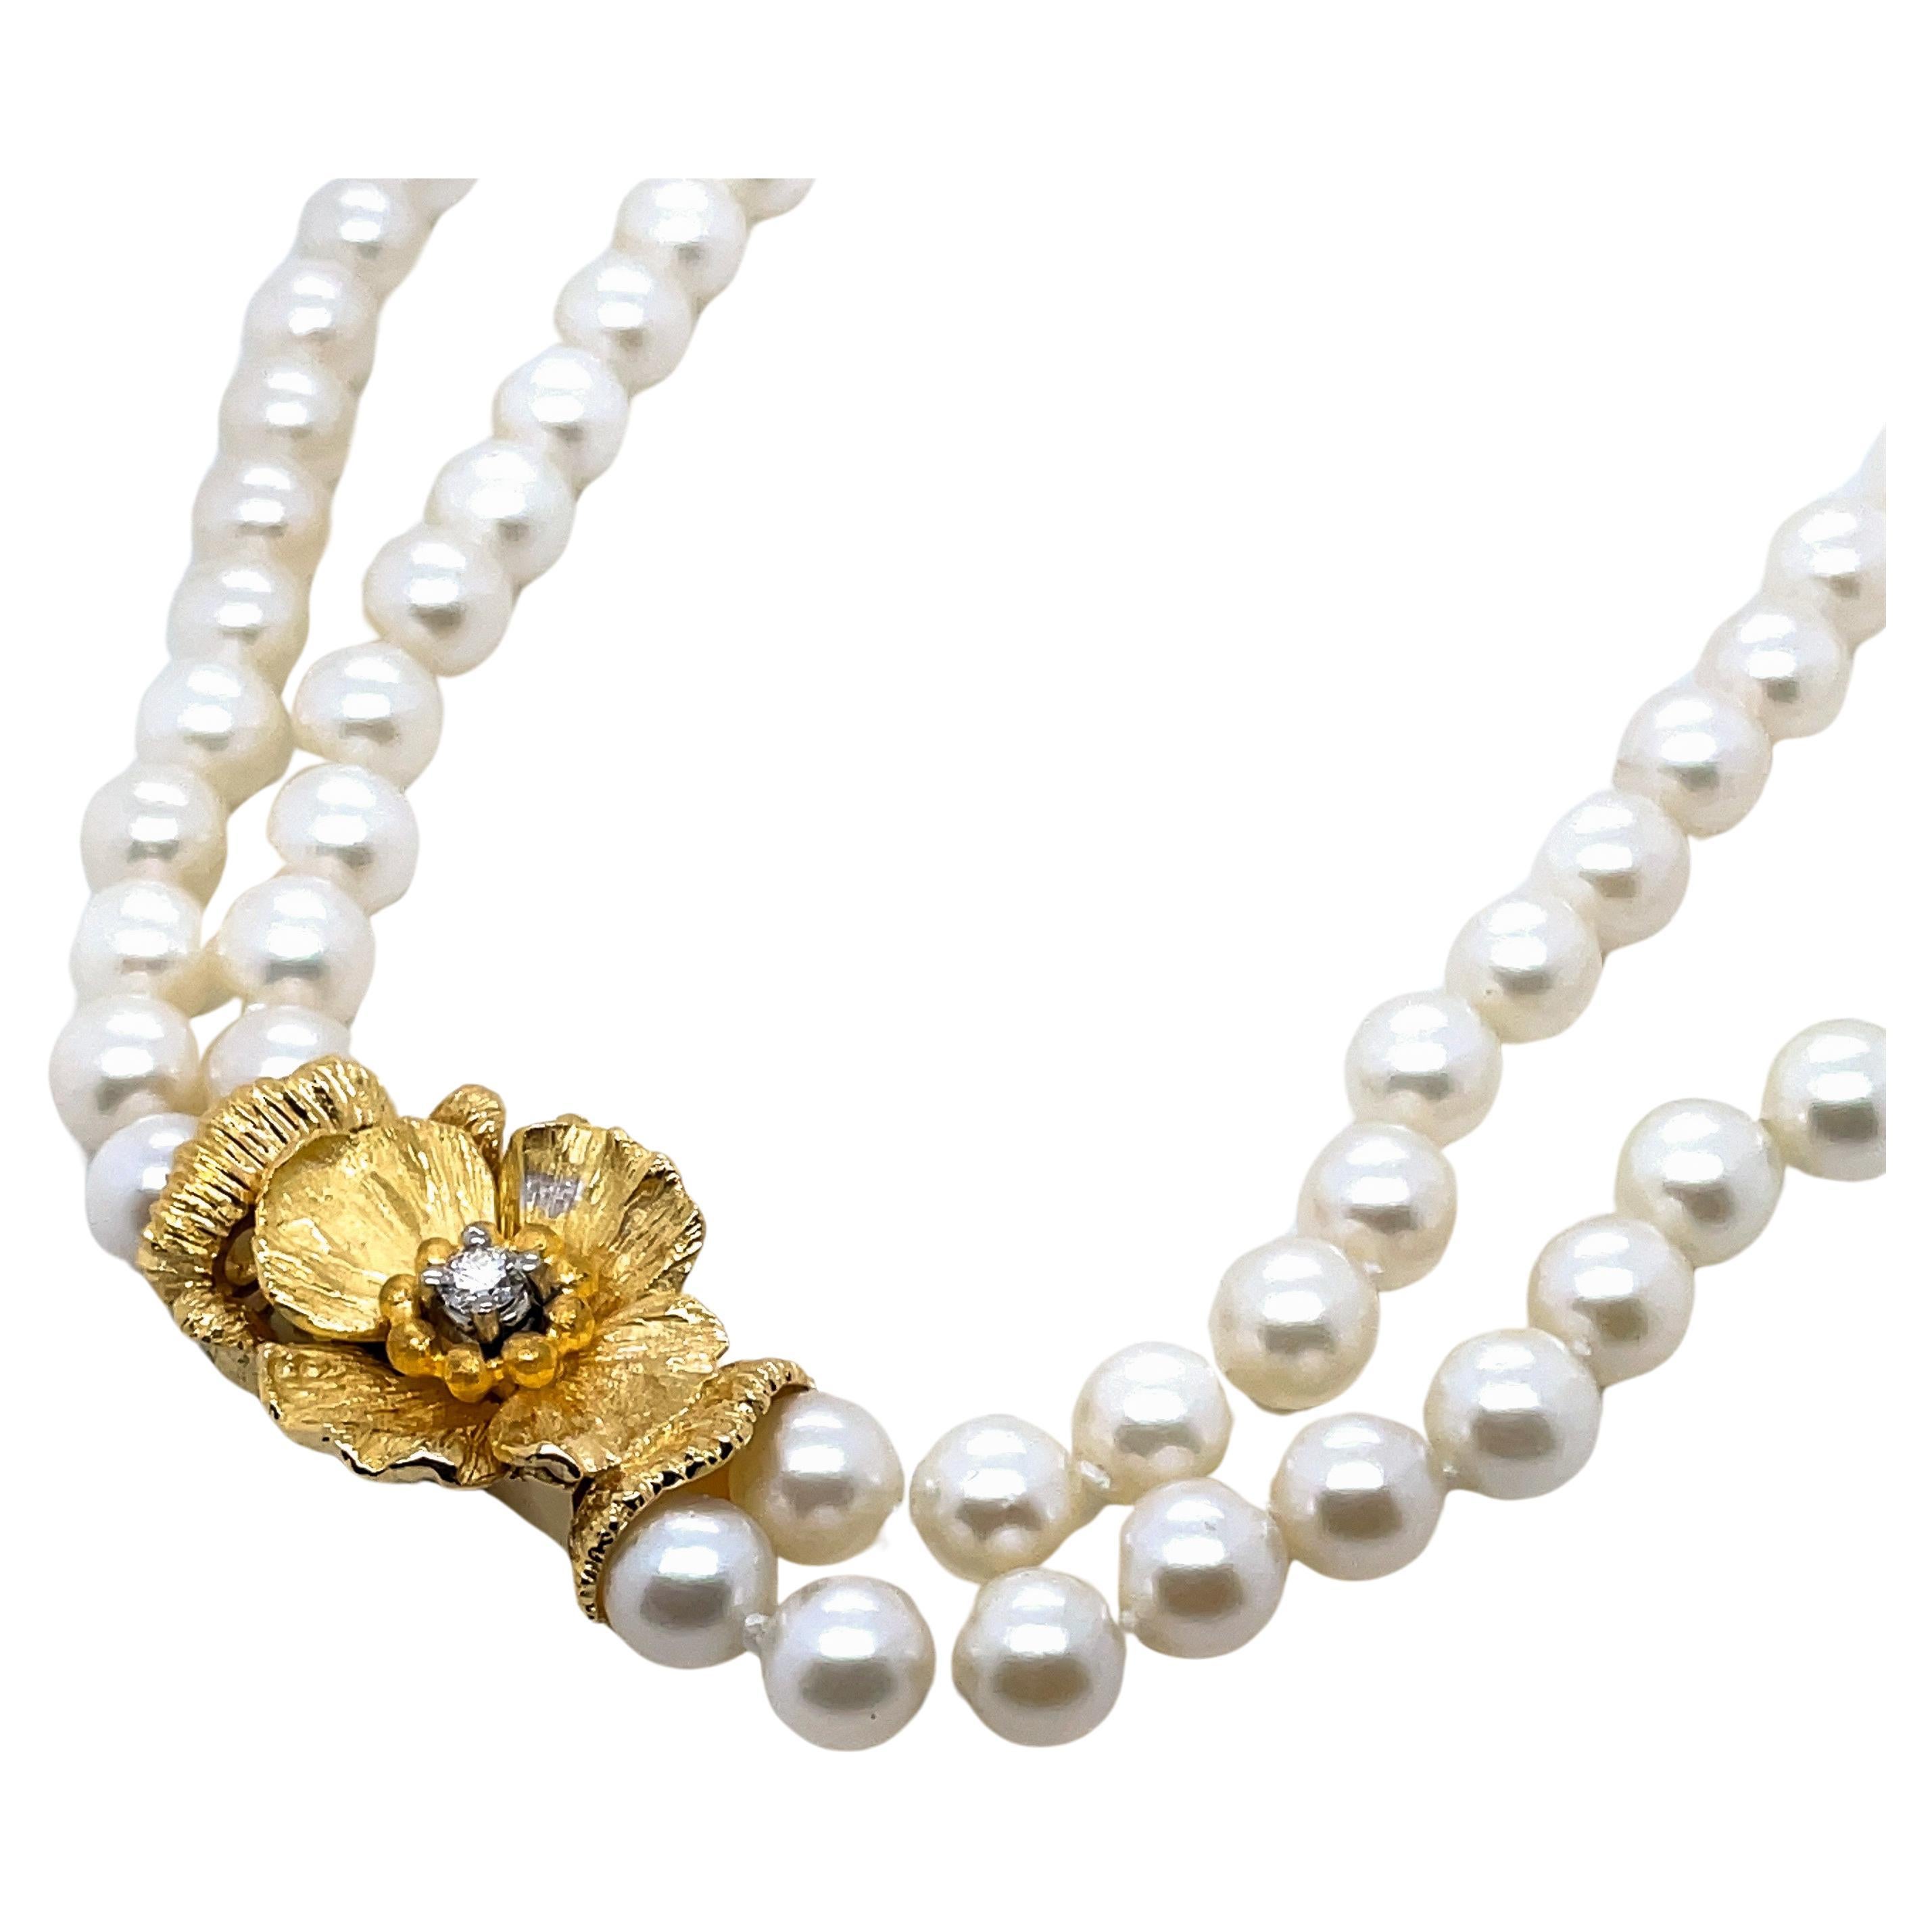 18k Gold Pearl Diamond Floral Necklace

This 15-inch pearl and diamond necklace drapes you in luxury as it rests gracefully against your skin.

Each of the 116 cultured pearls is a testament to nature's mastery, handpicked for their flawless luster